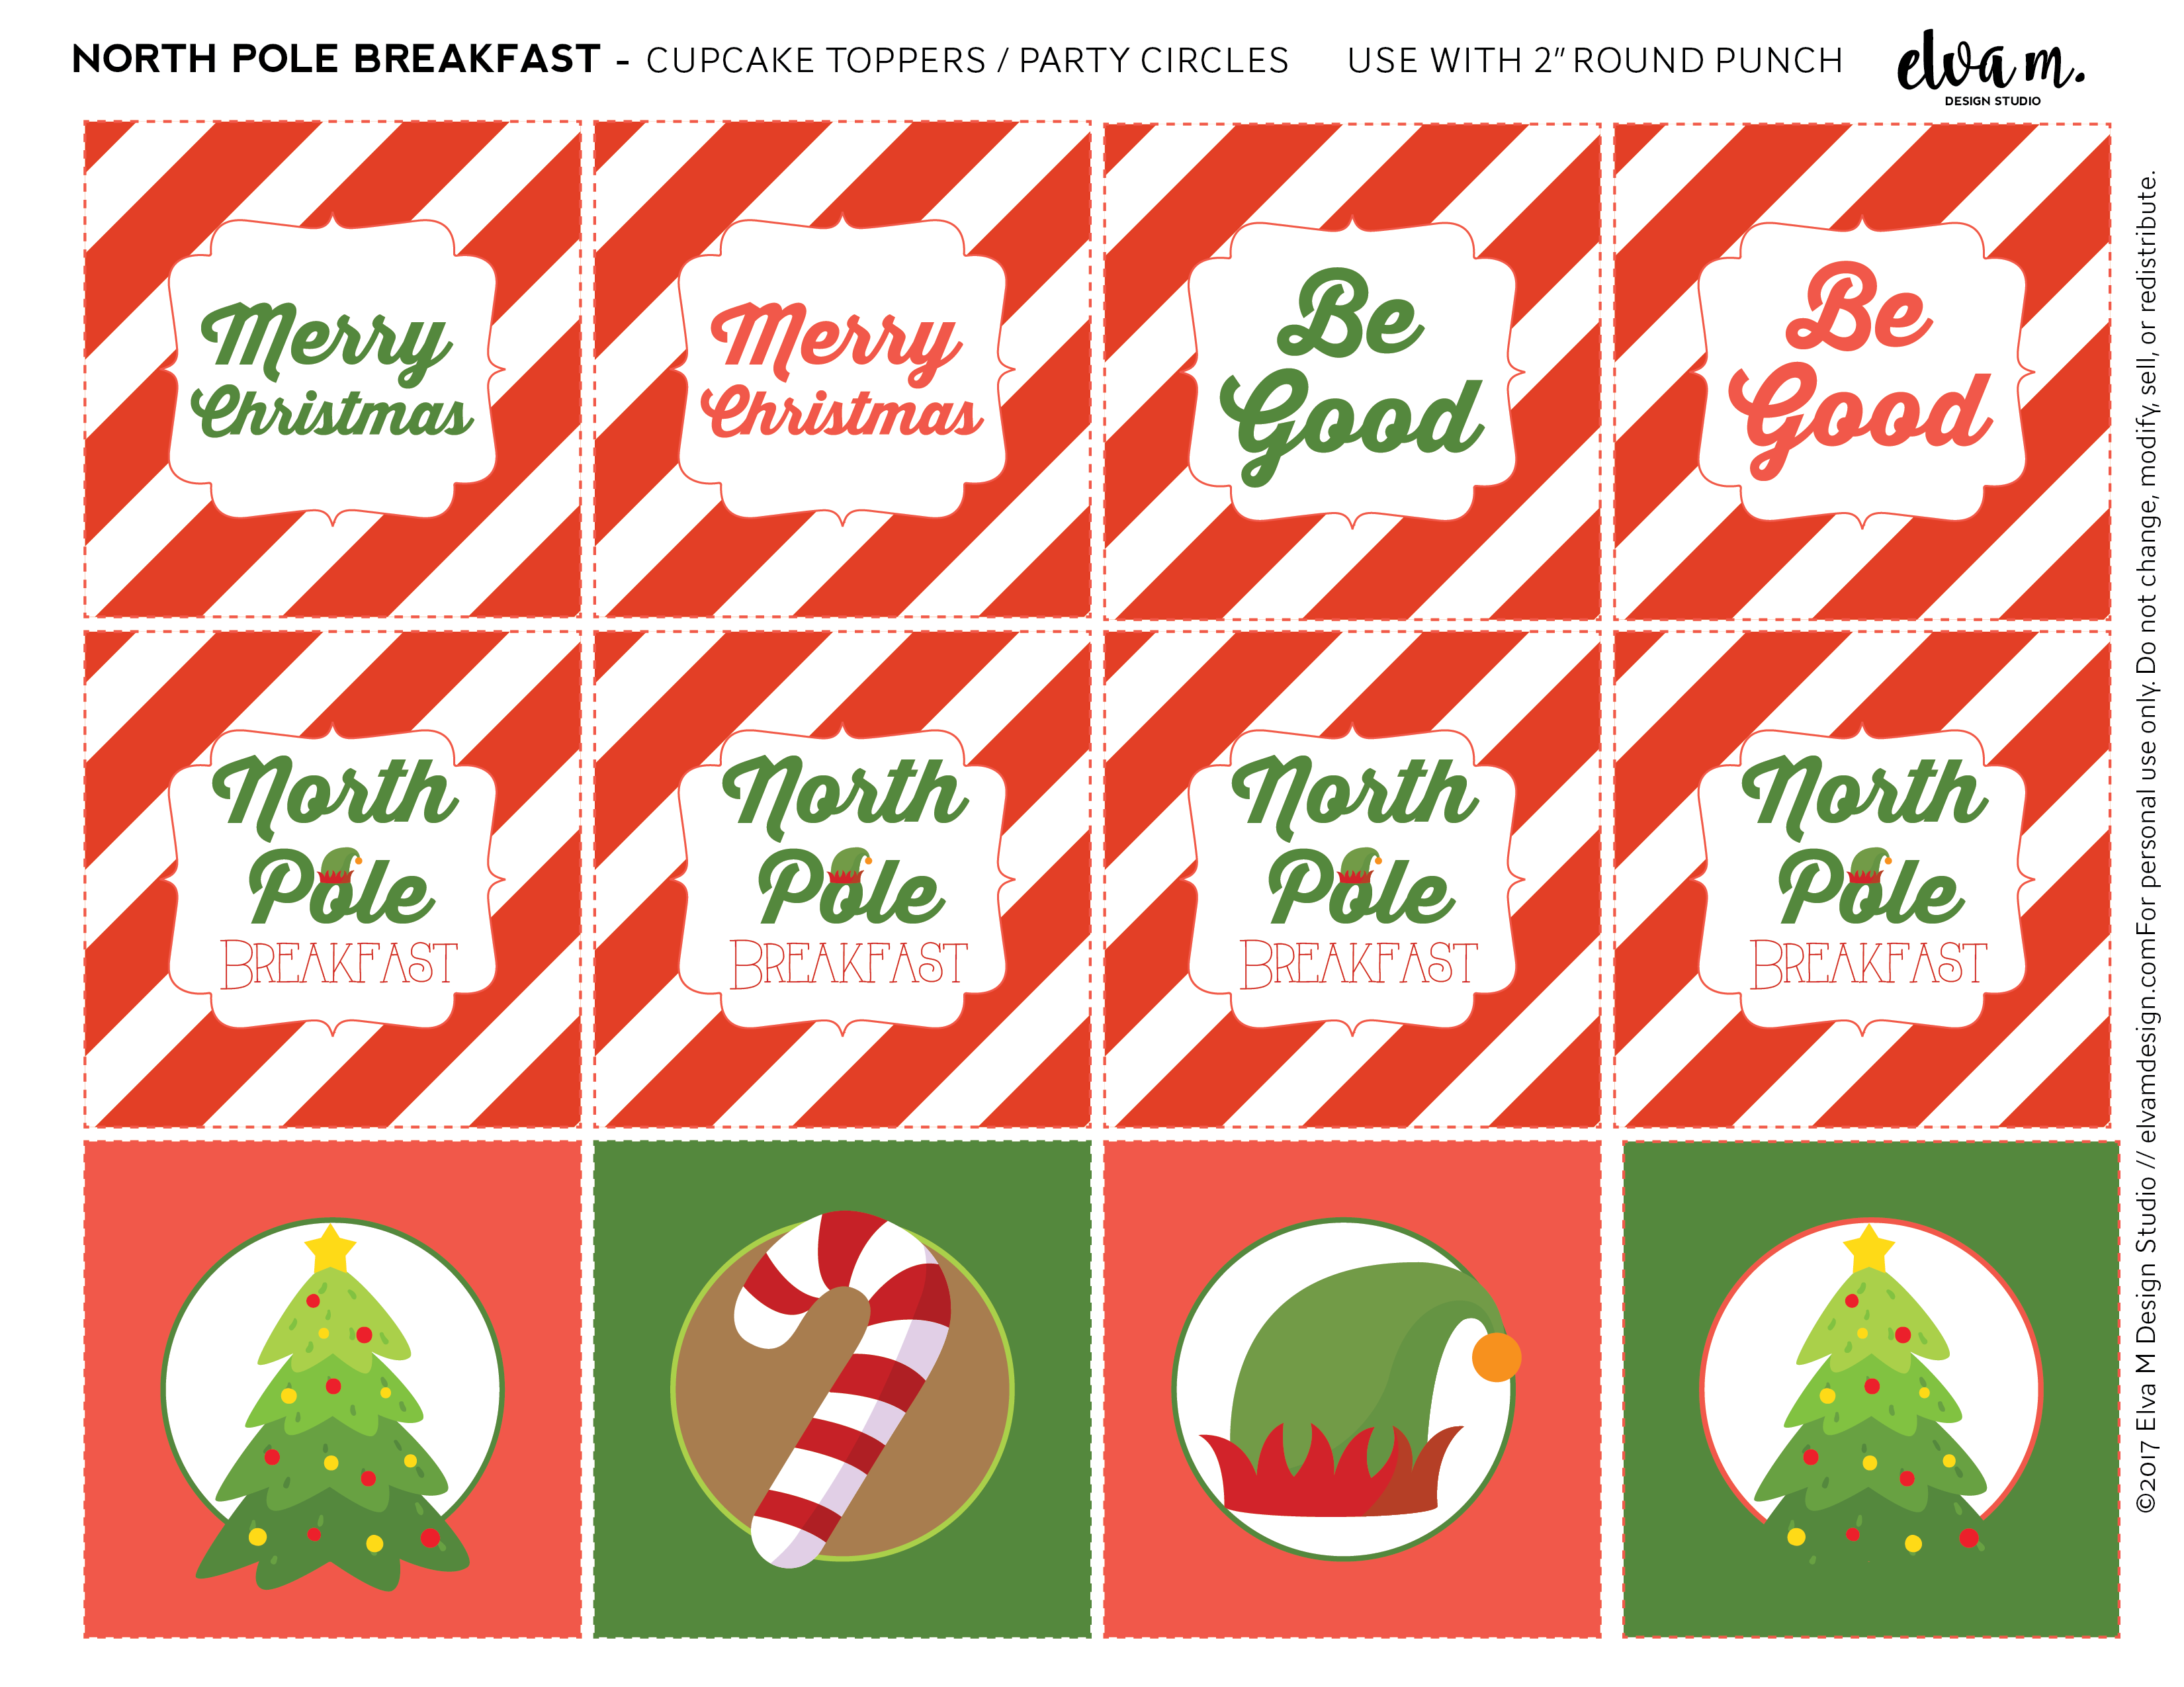 Download These Free Elf on the Shelf North Pole Breakfast Printables